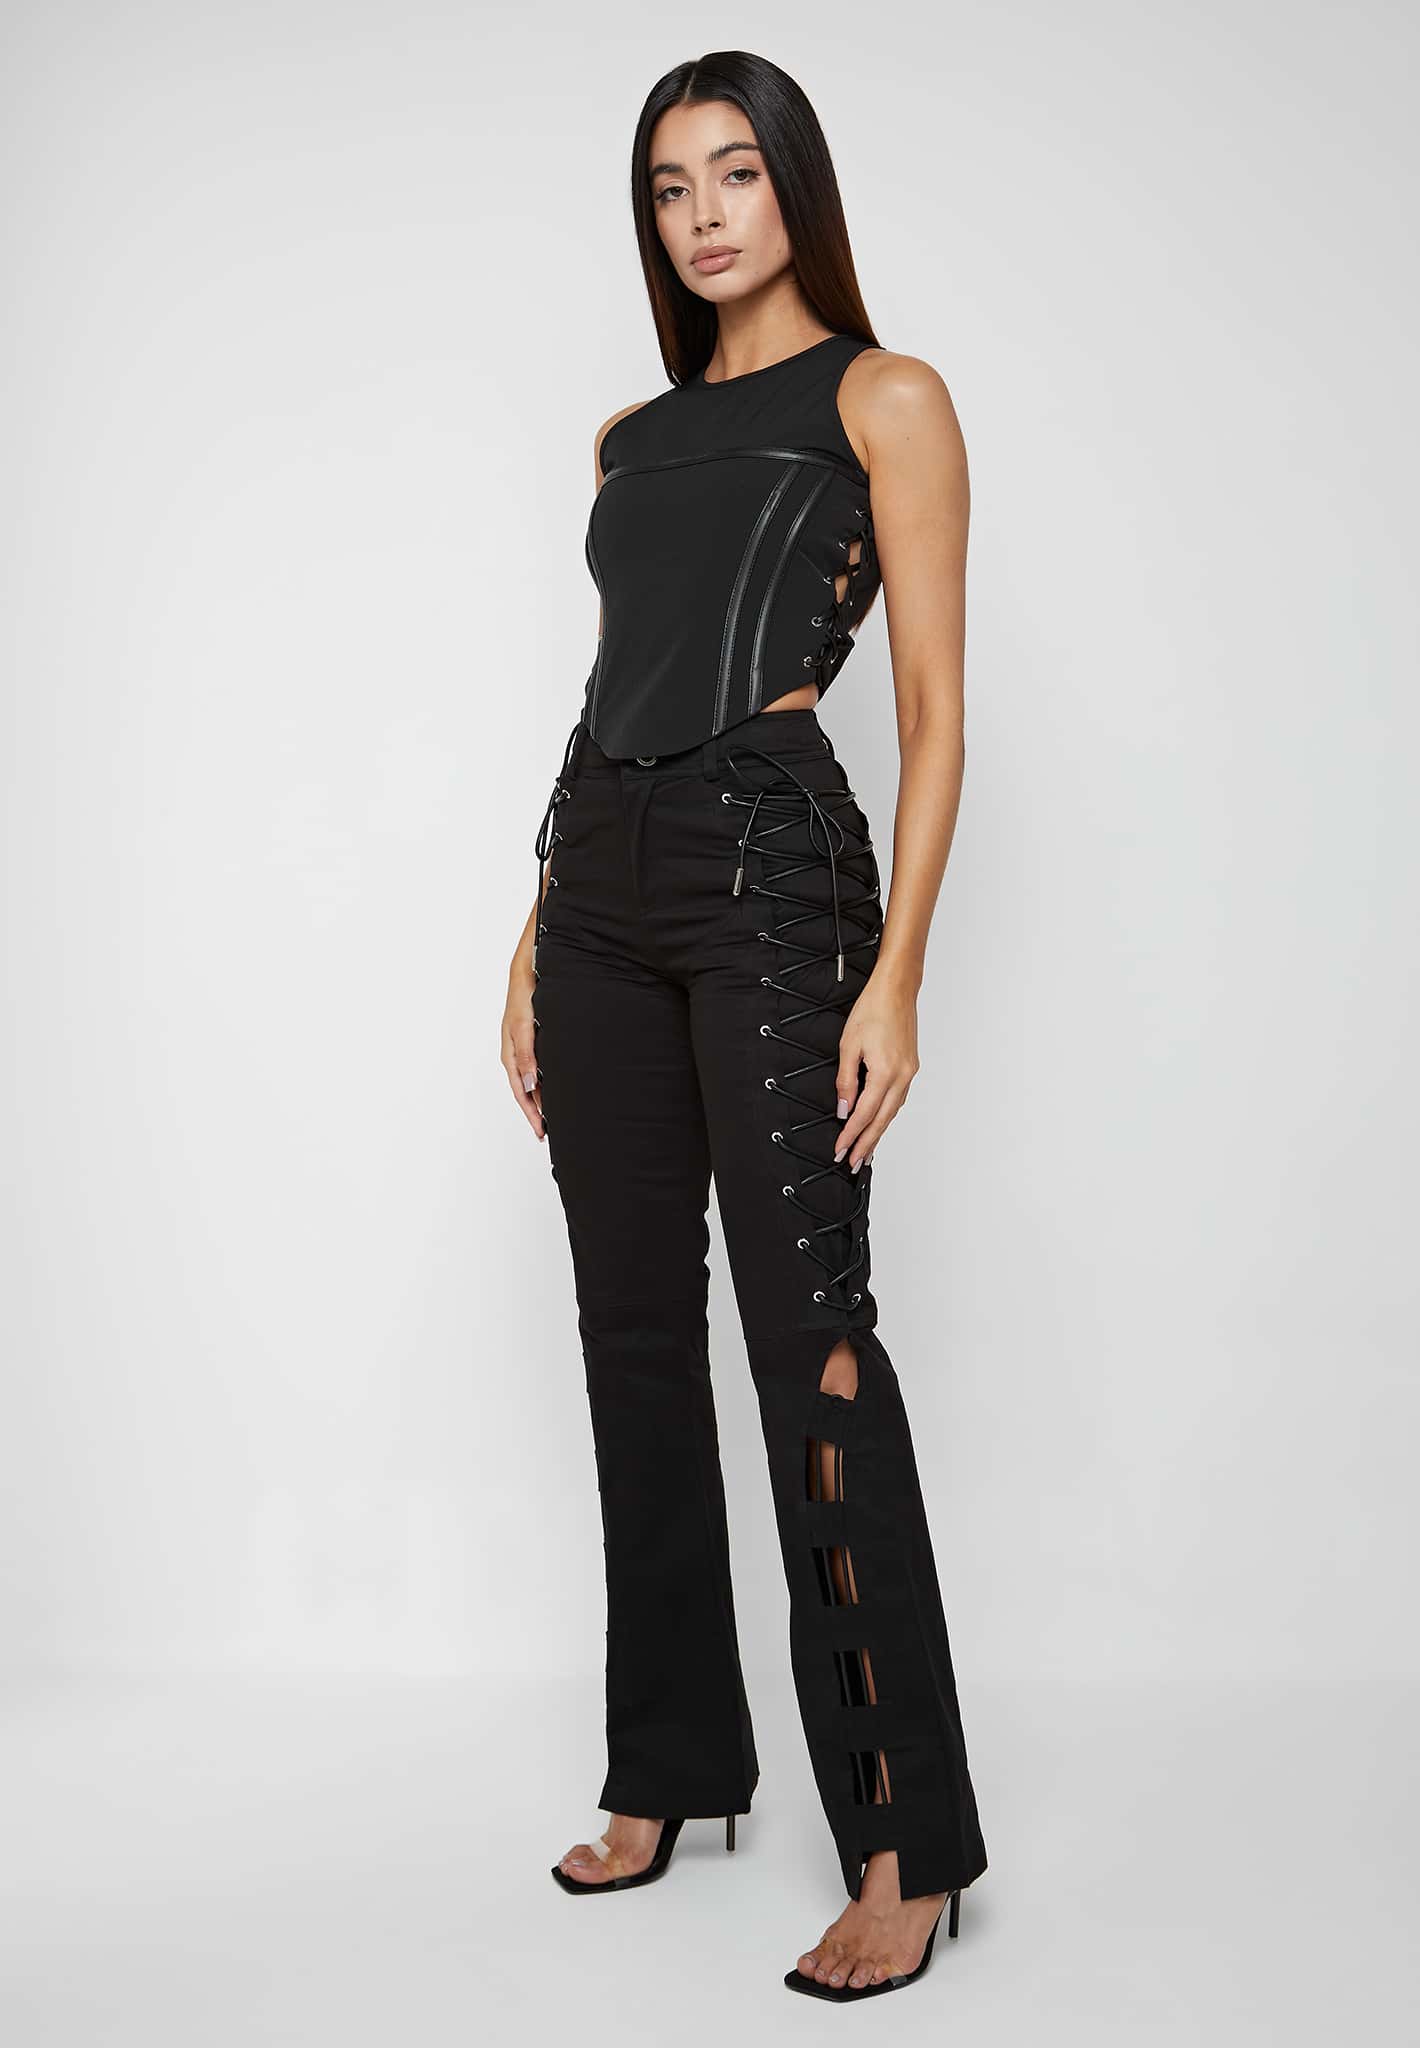 Floral lace trouser in Black Ready-to-wear